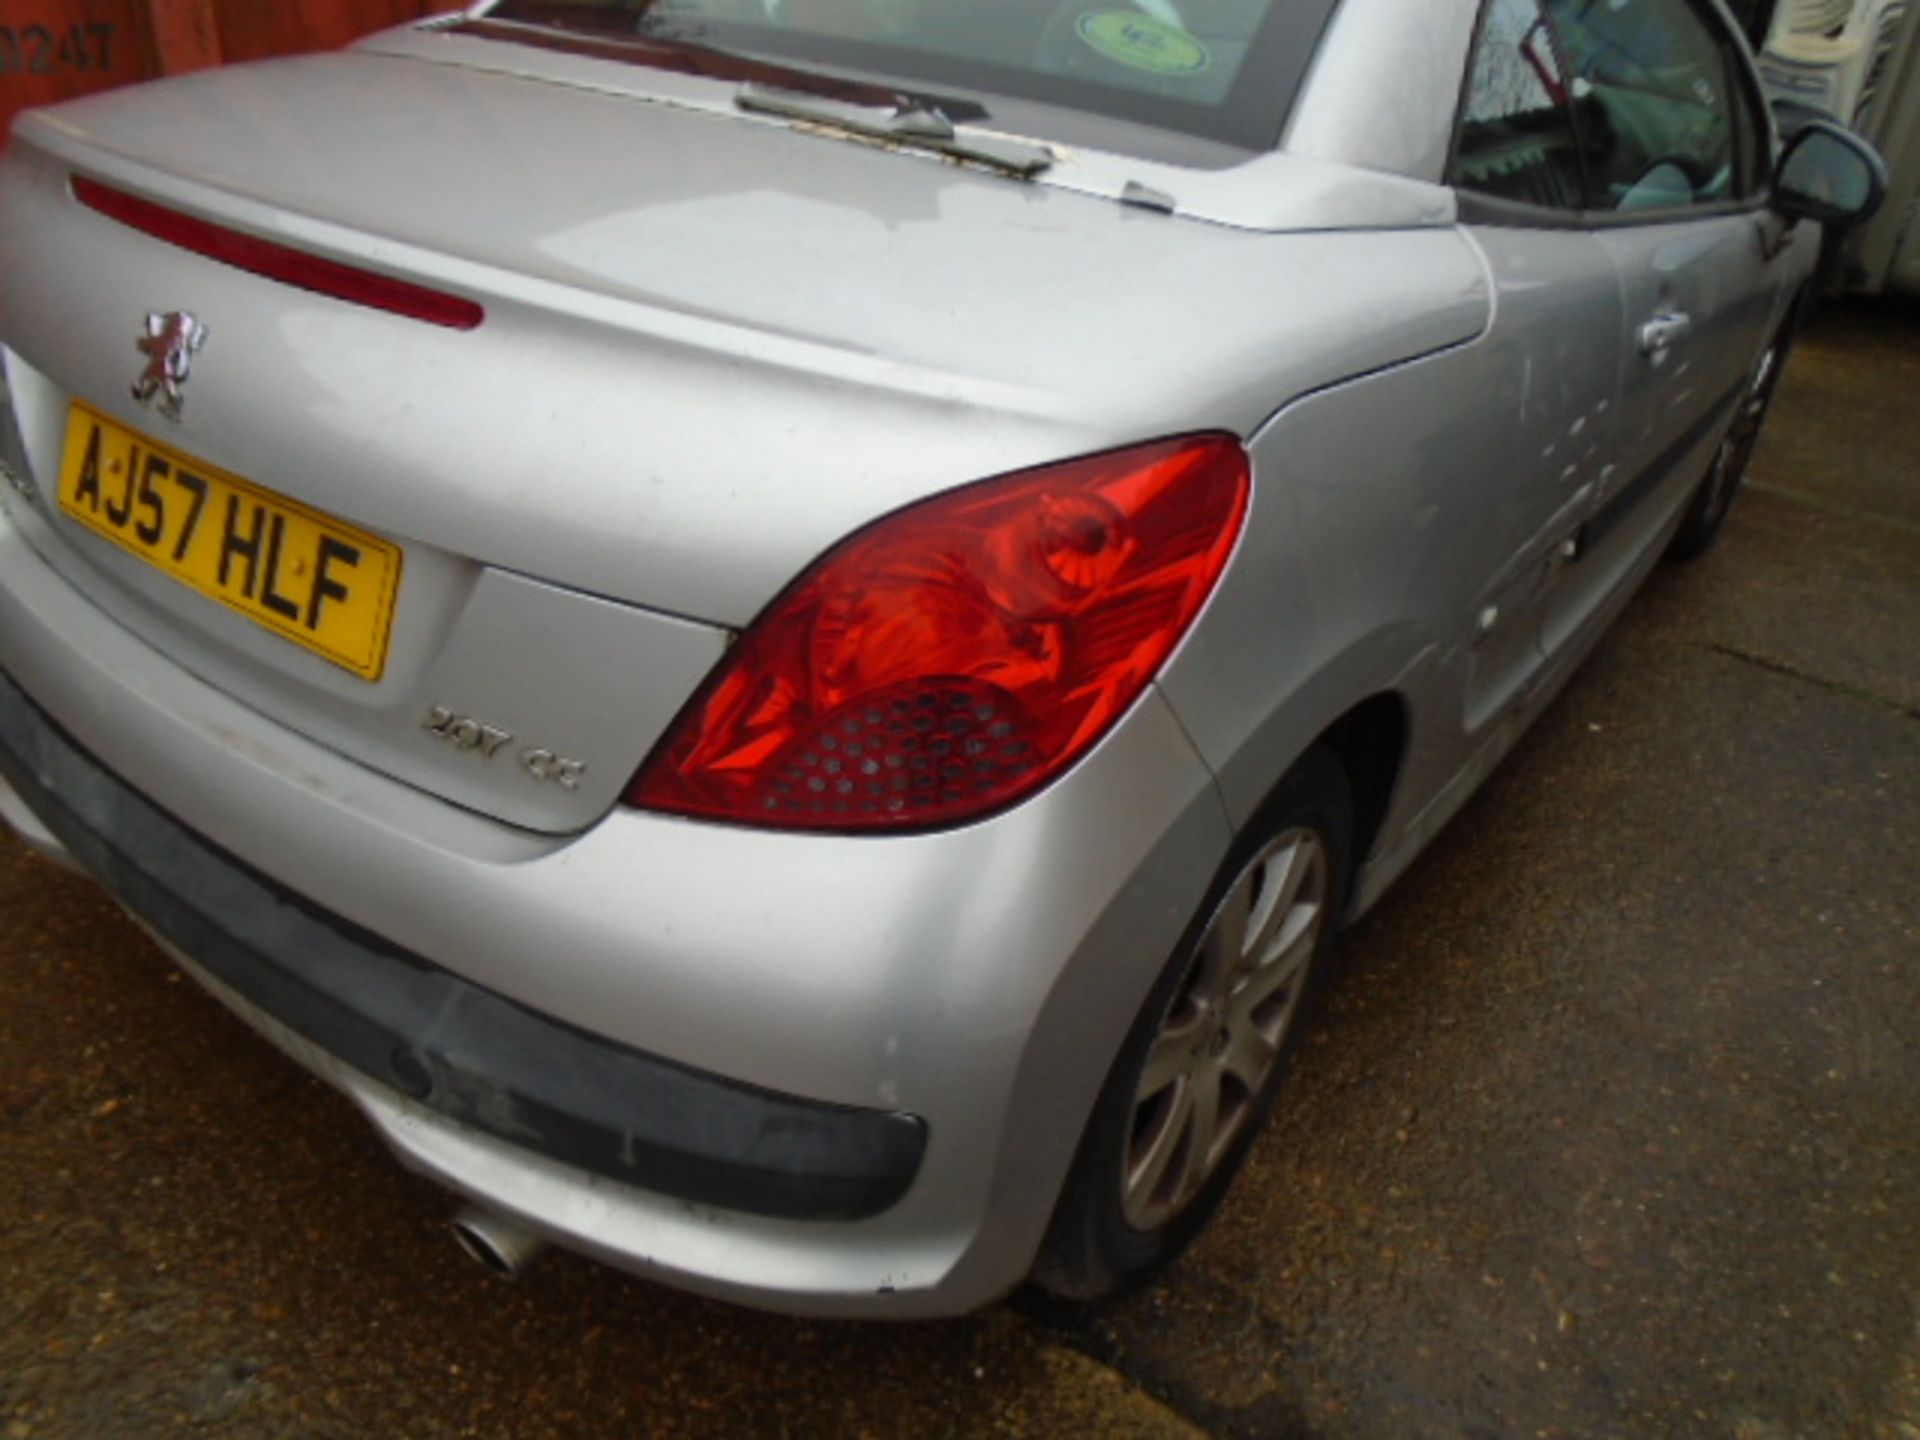 2007 Peugeot 207 sport CC Coupe 1598CC. AJ57 HLF. From a deceased estate, M.O.T expired July 2023, - Image 9 of 13